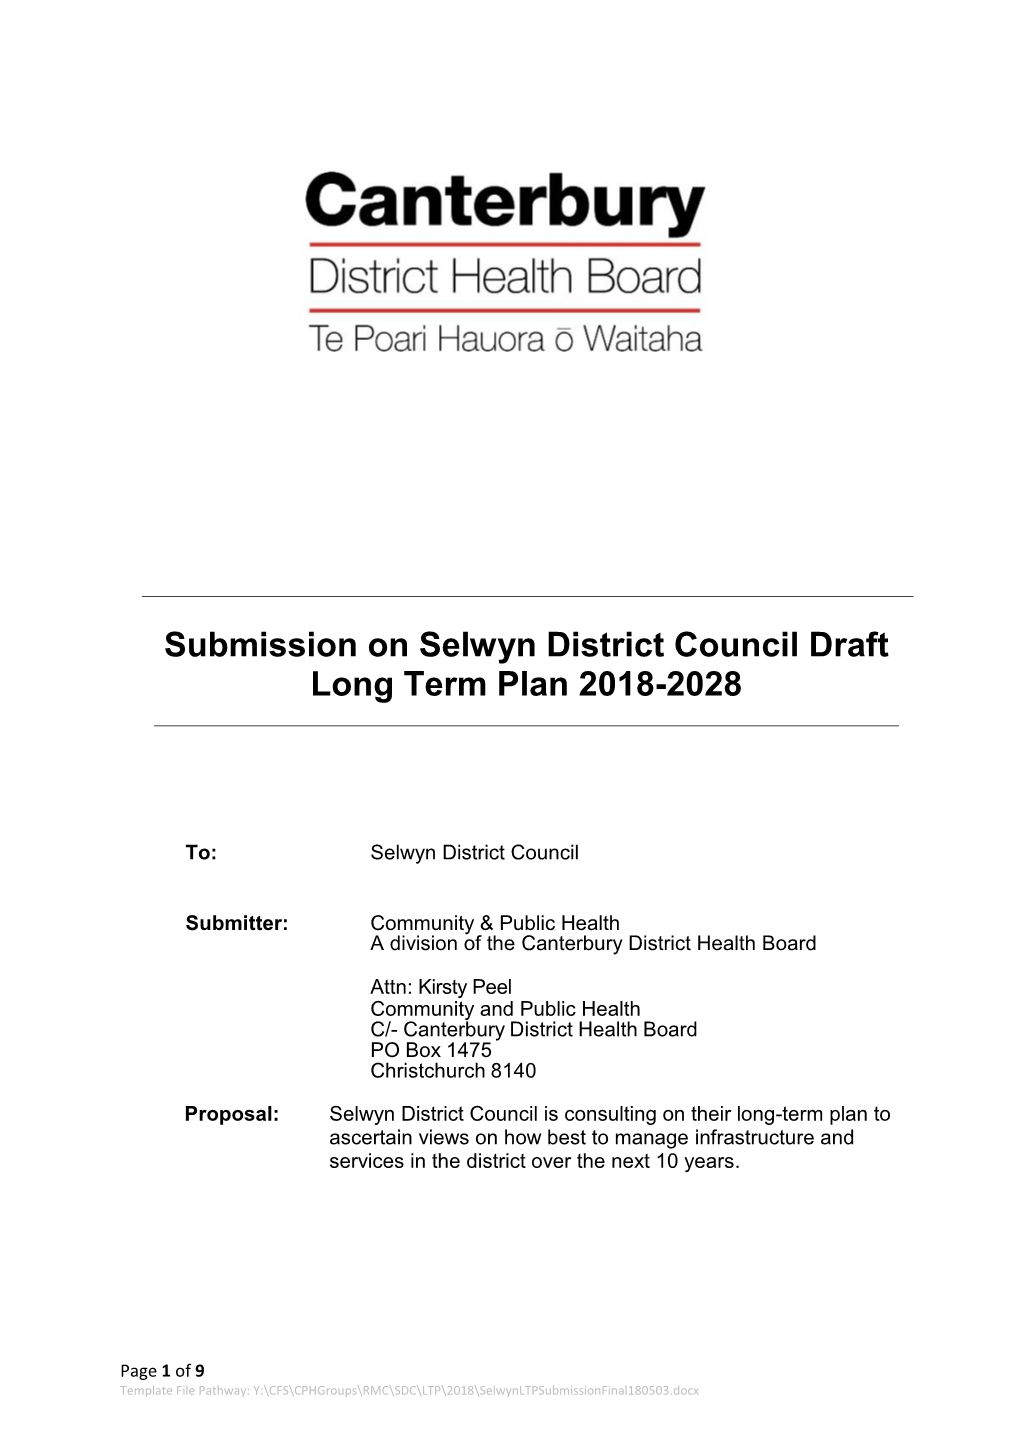 Submission on Selwyn District Council Draft Long Term Plan 2018-2028